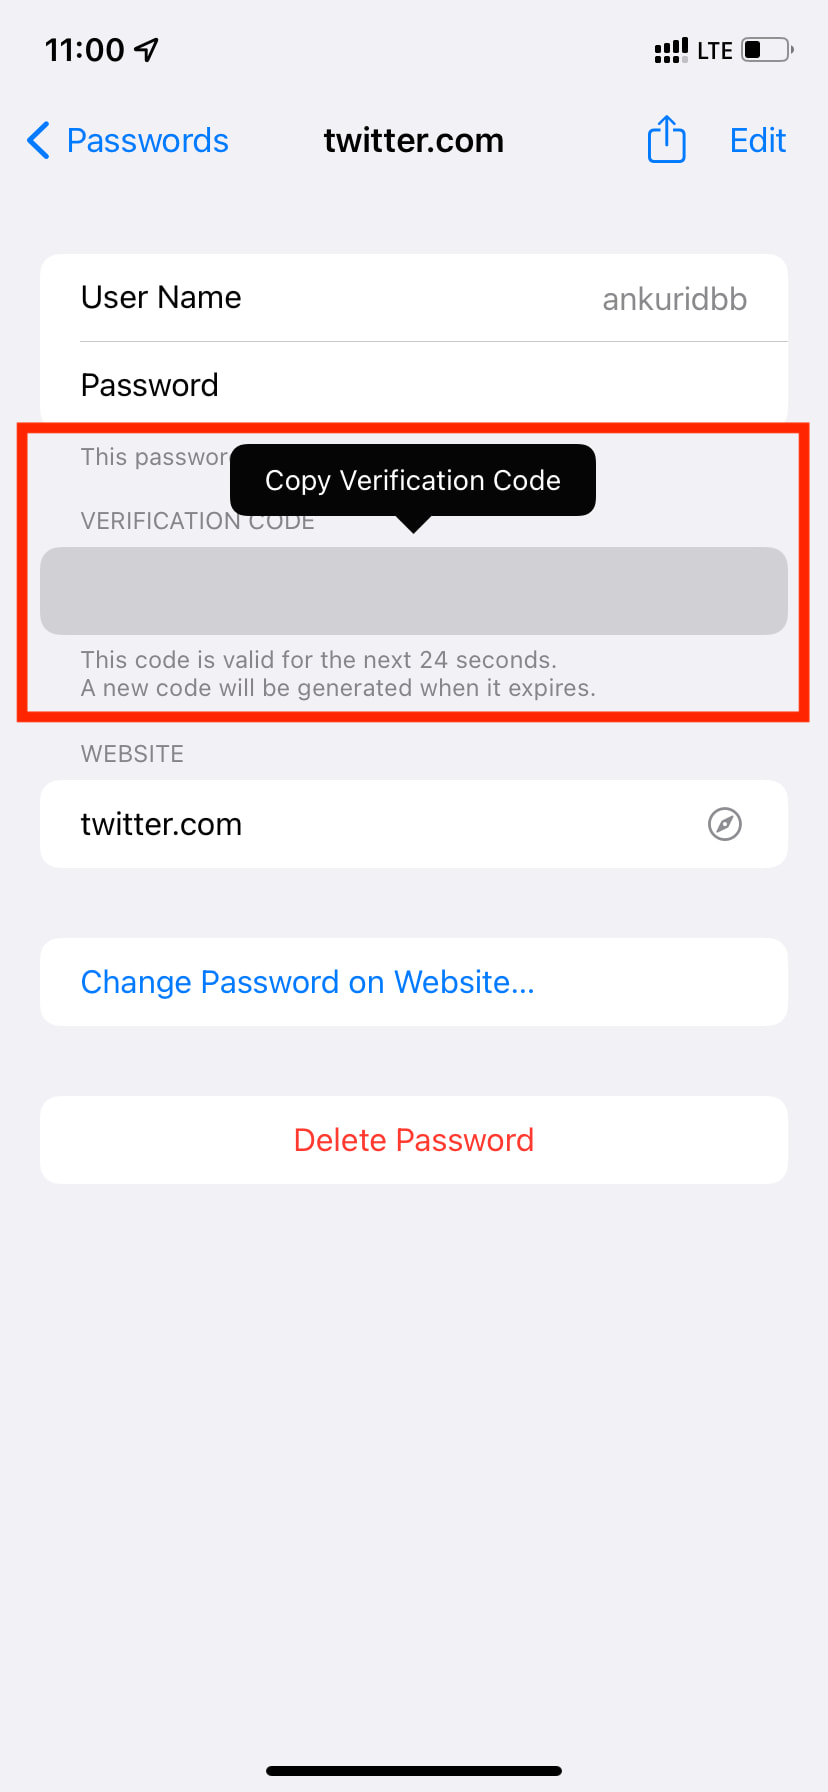 Copy Verification Code from built-in authenticator on iPhone